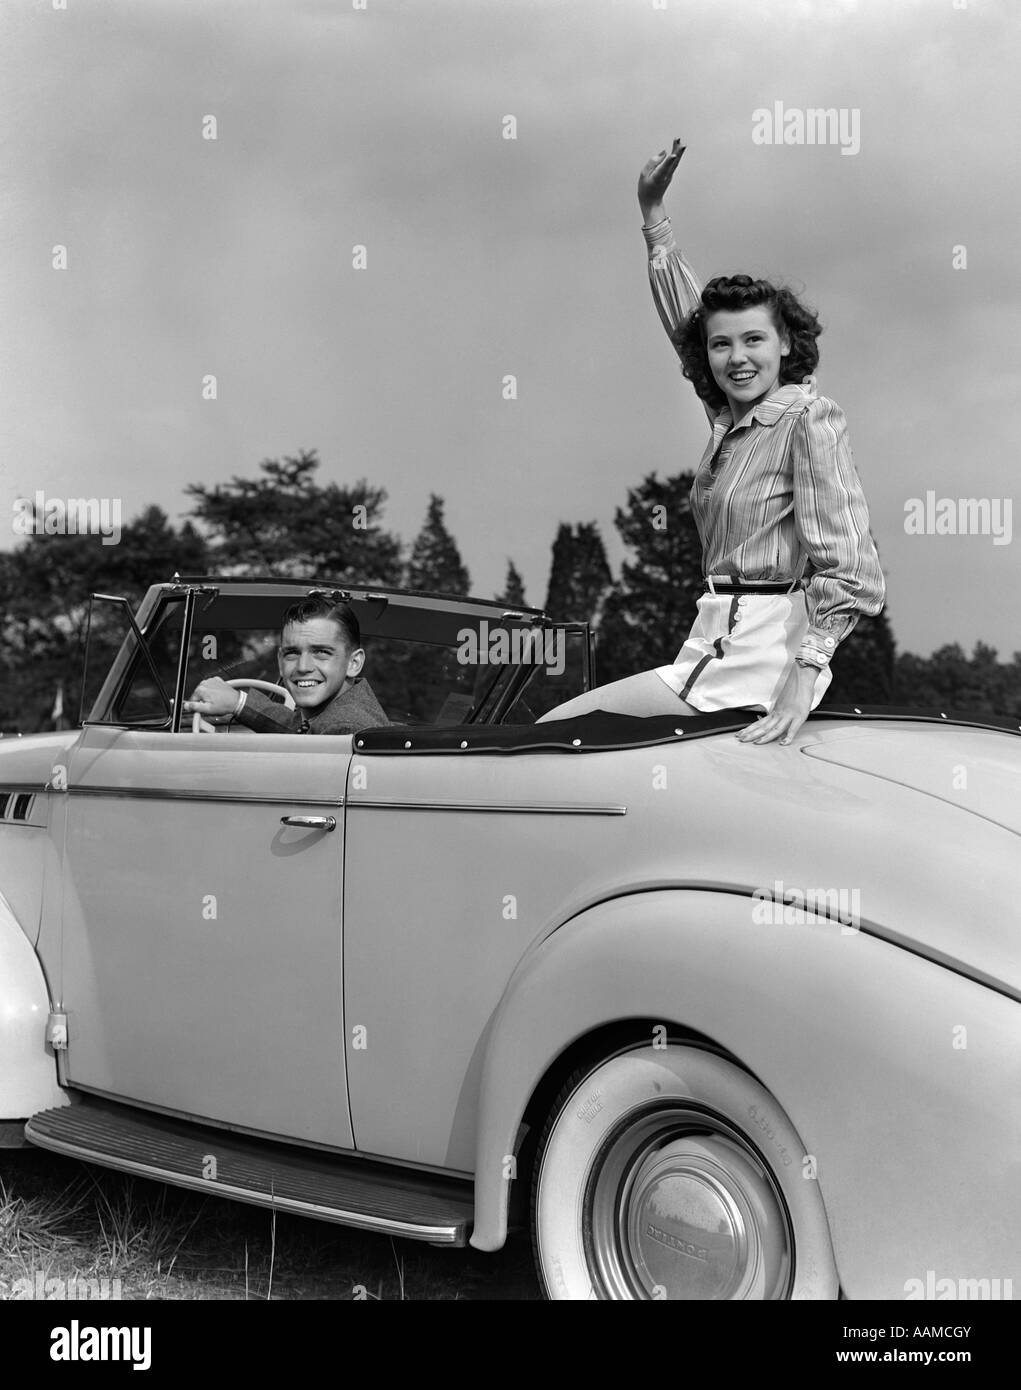 1940s COUPLE CAR DRIVING CONVERTIBLE SMILE WAVING Stock Photo - Alamy